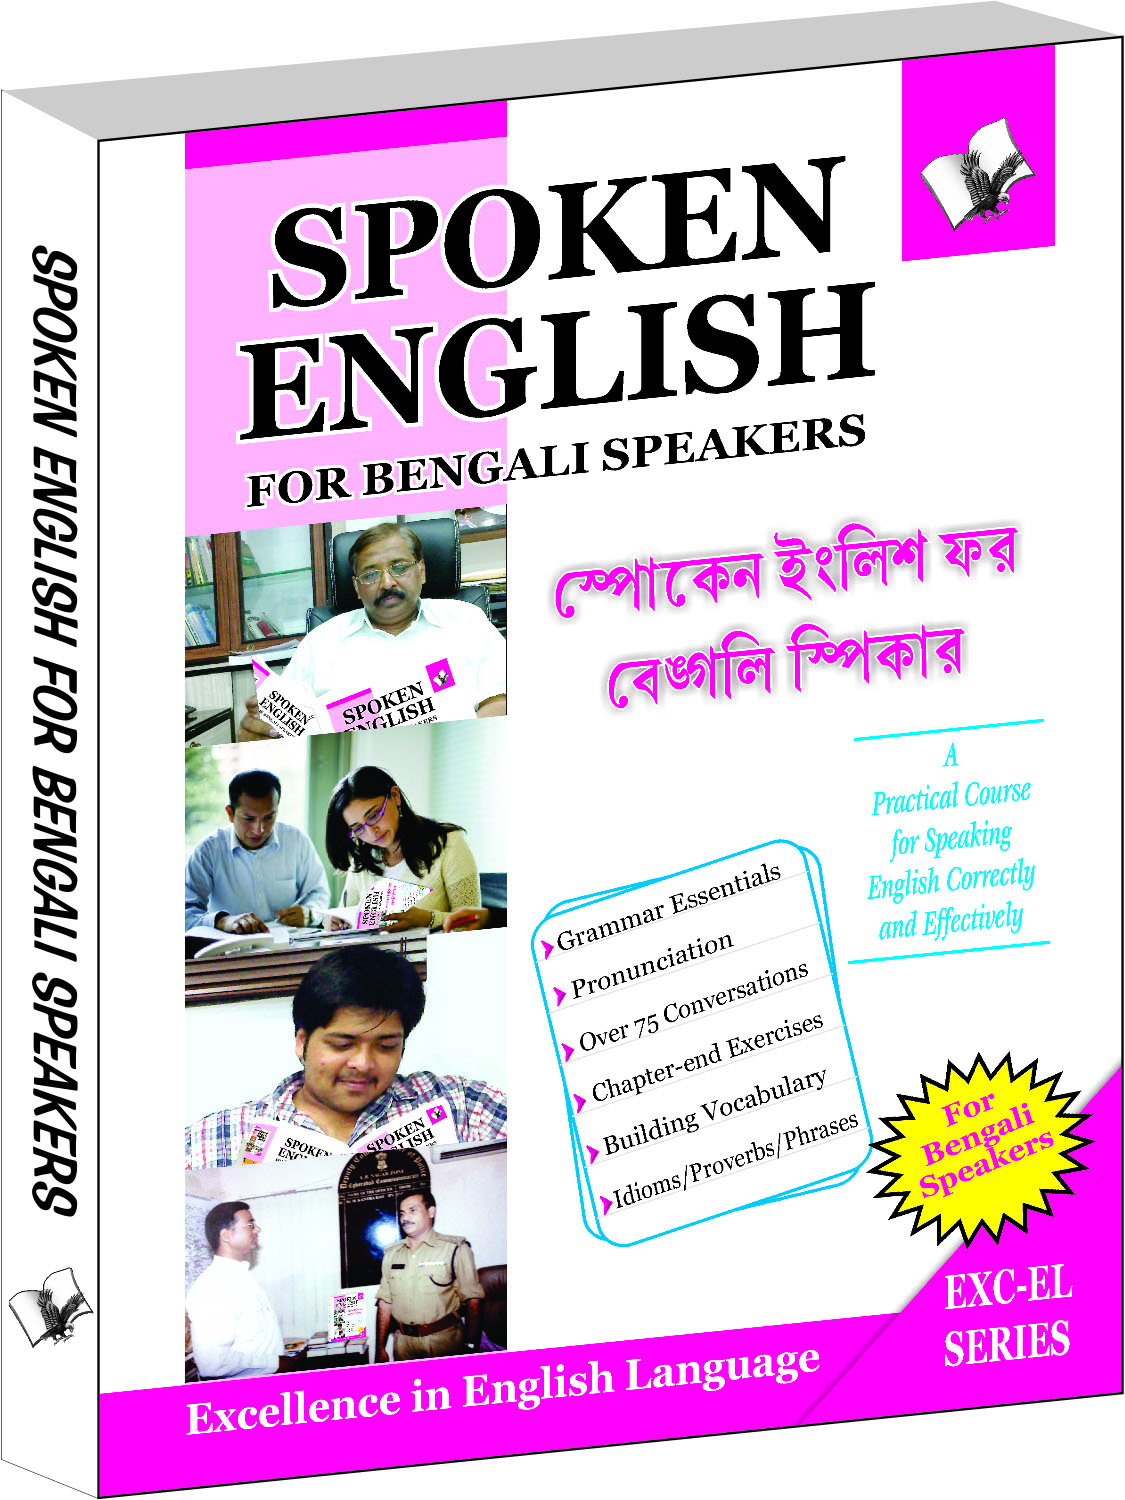 Spoken English For Bangali Speakers-How to convey your ideas in English at home, market & business for Bengali speakers